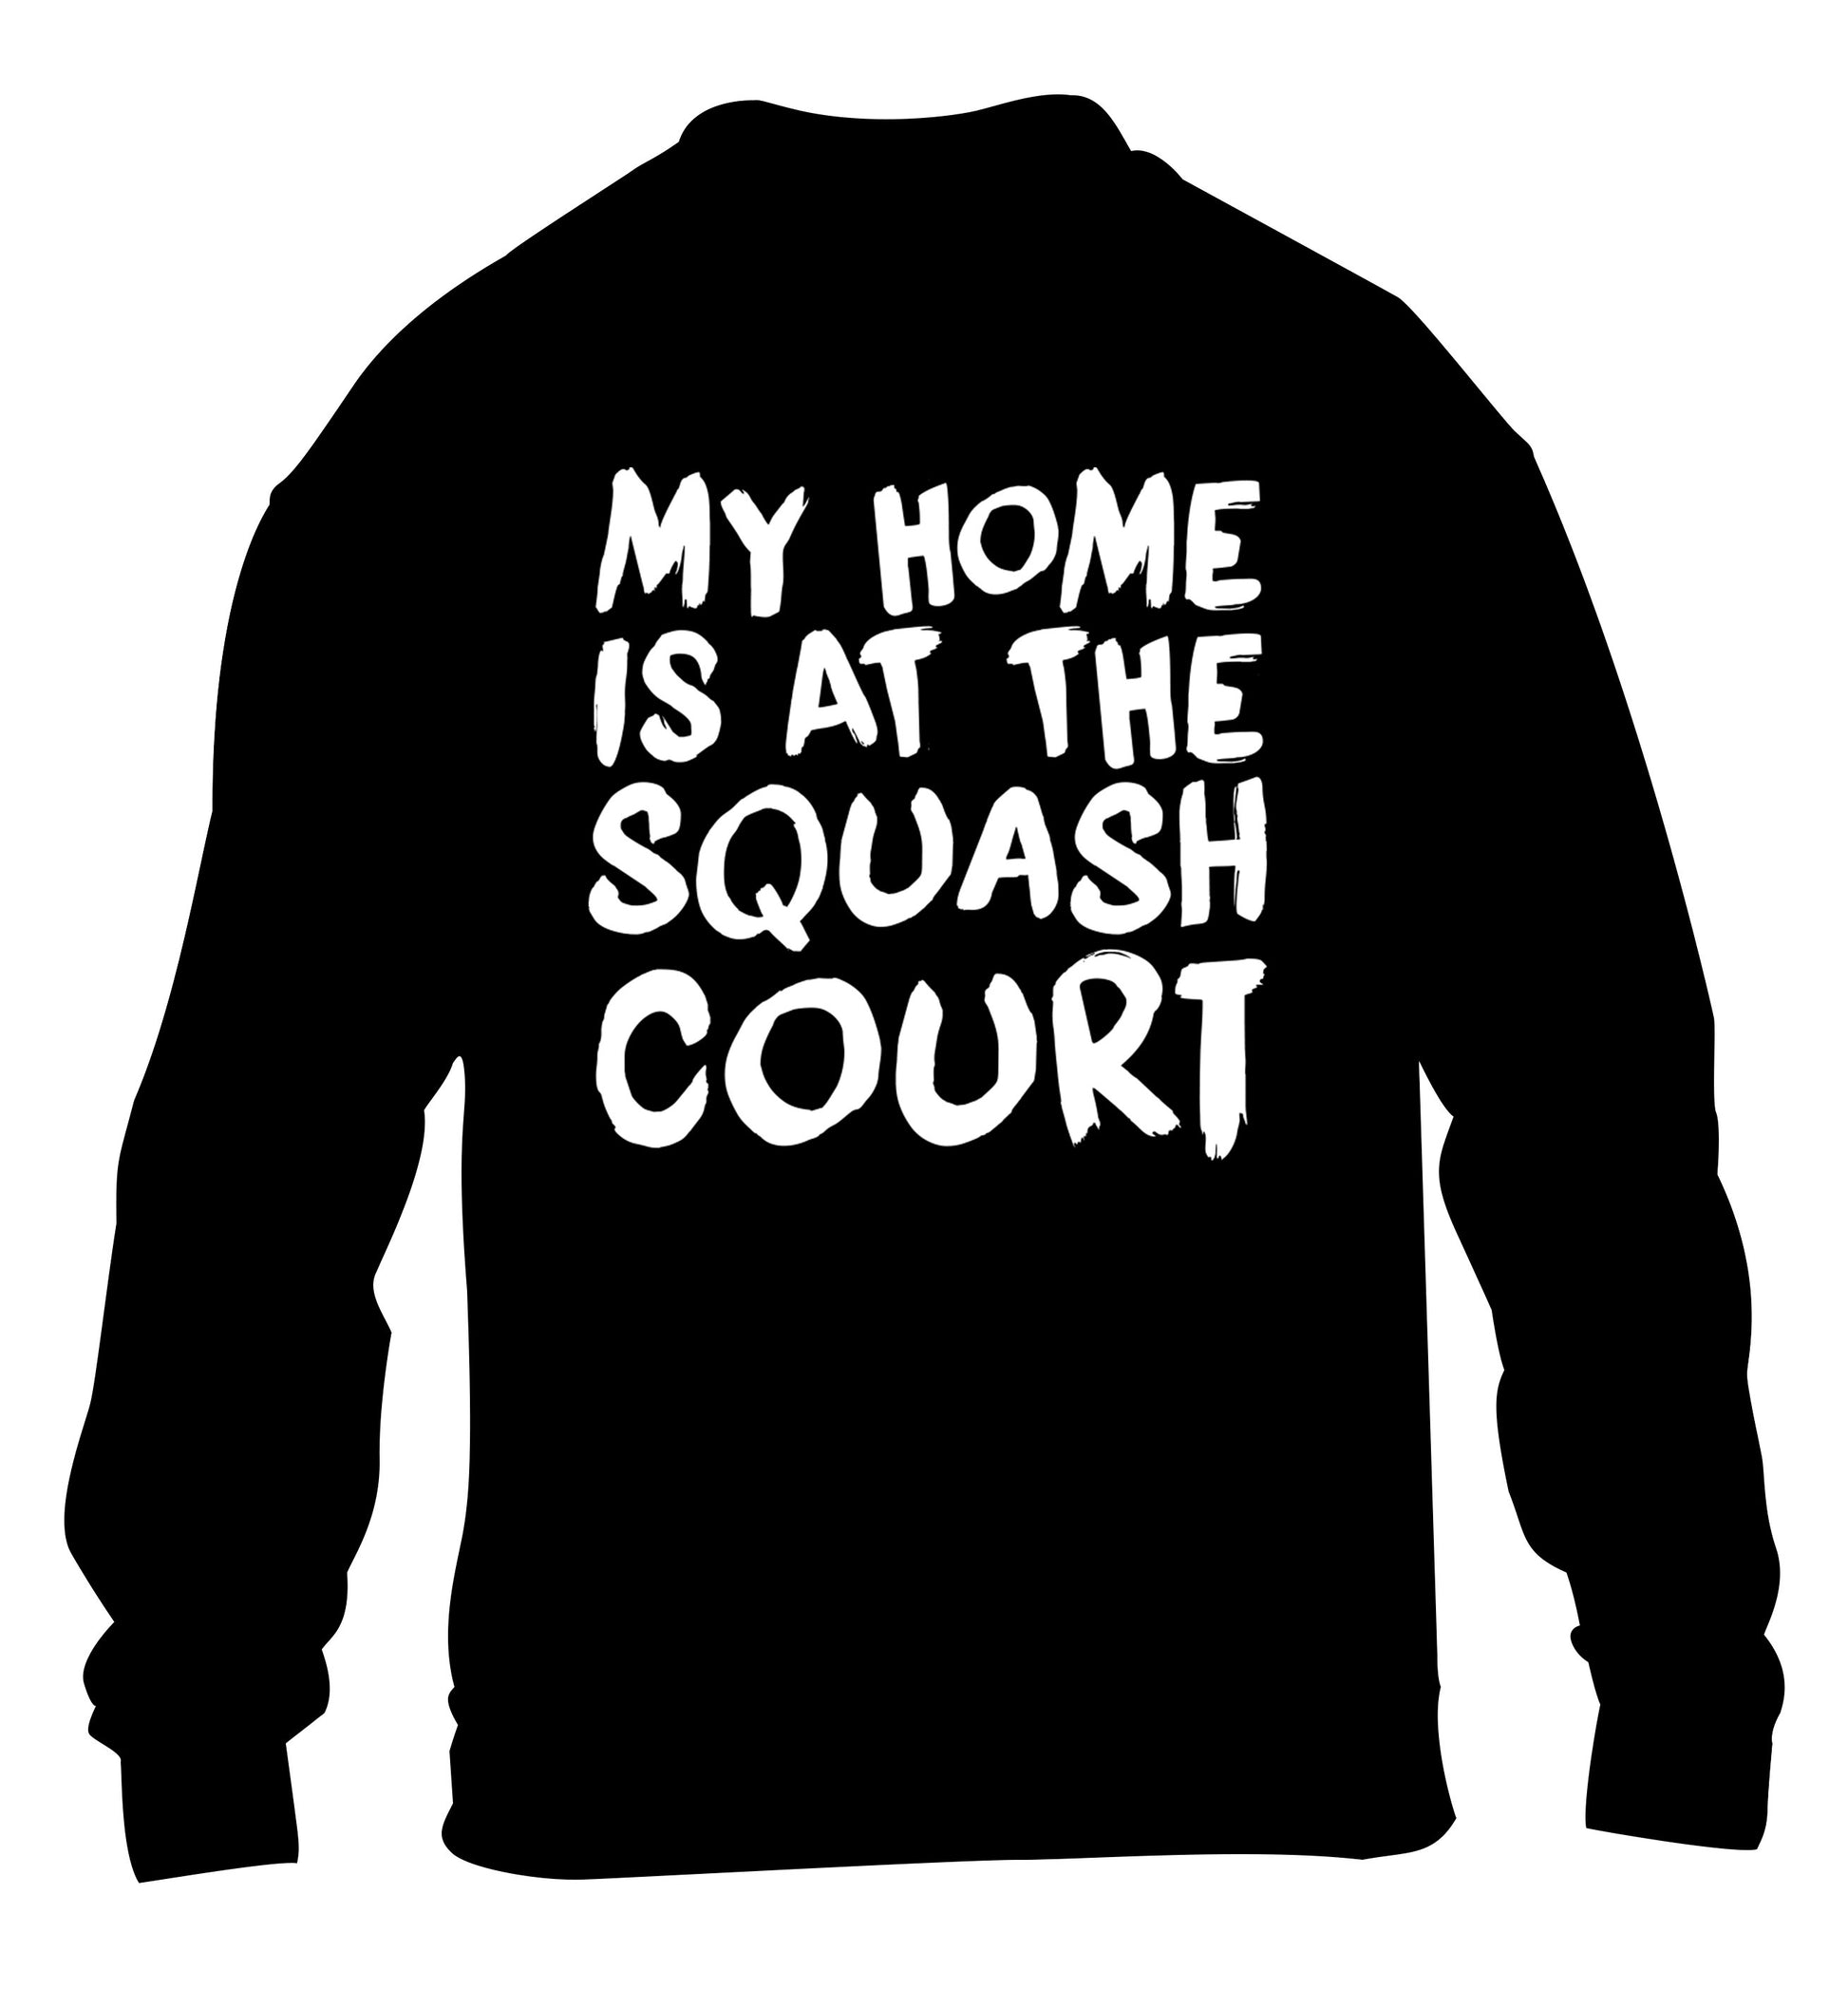 My home is at the squash court children's black sweater 12-14 Years